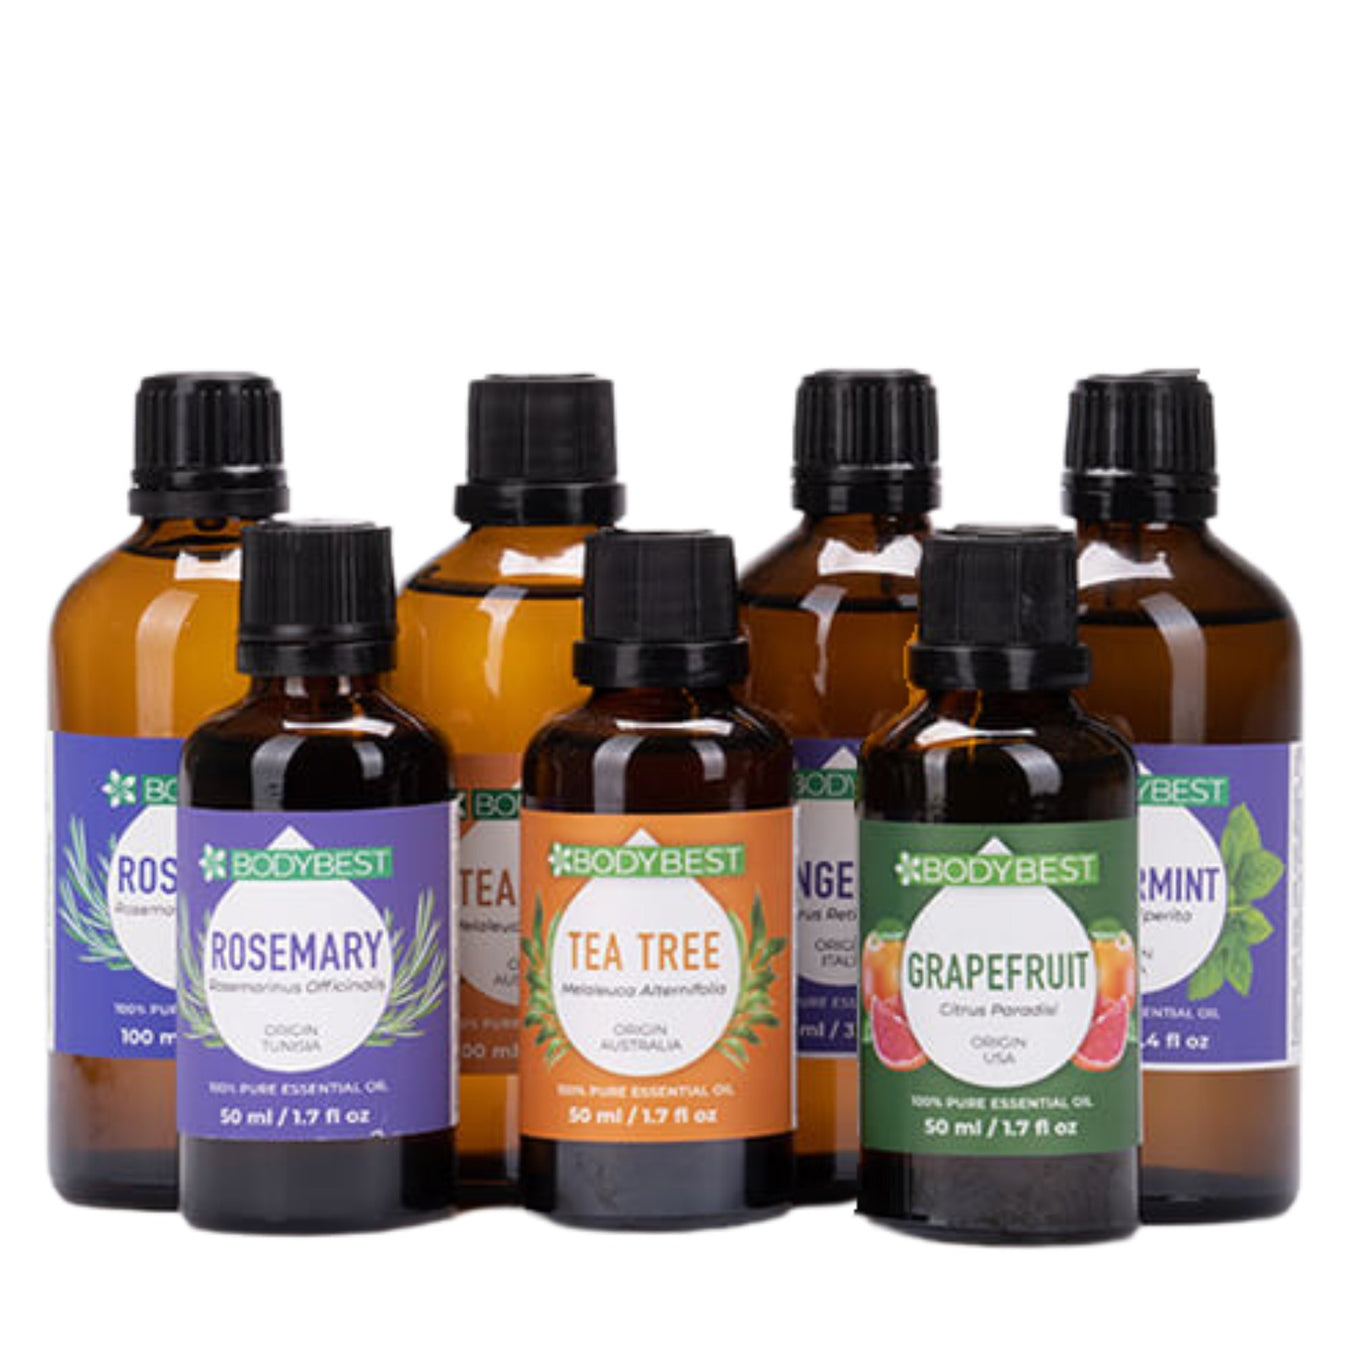 Essential Oils - Natural and Pure Oils extracted from leaf, barks, flowers